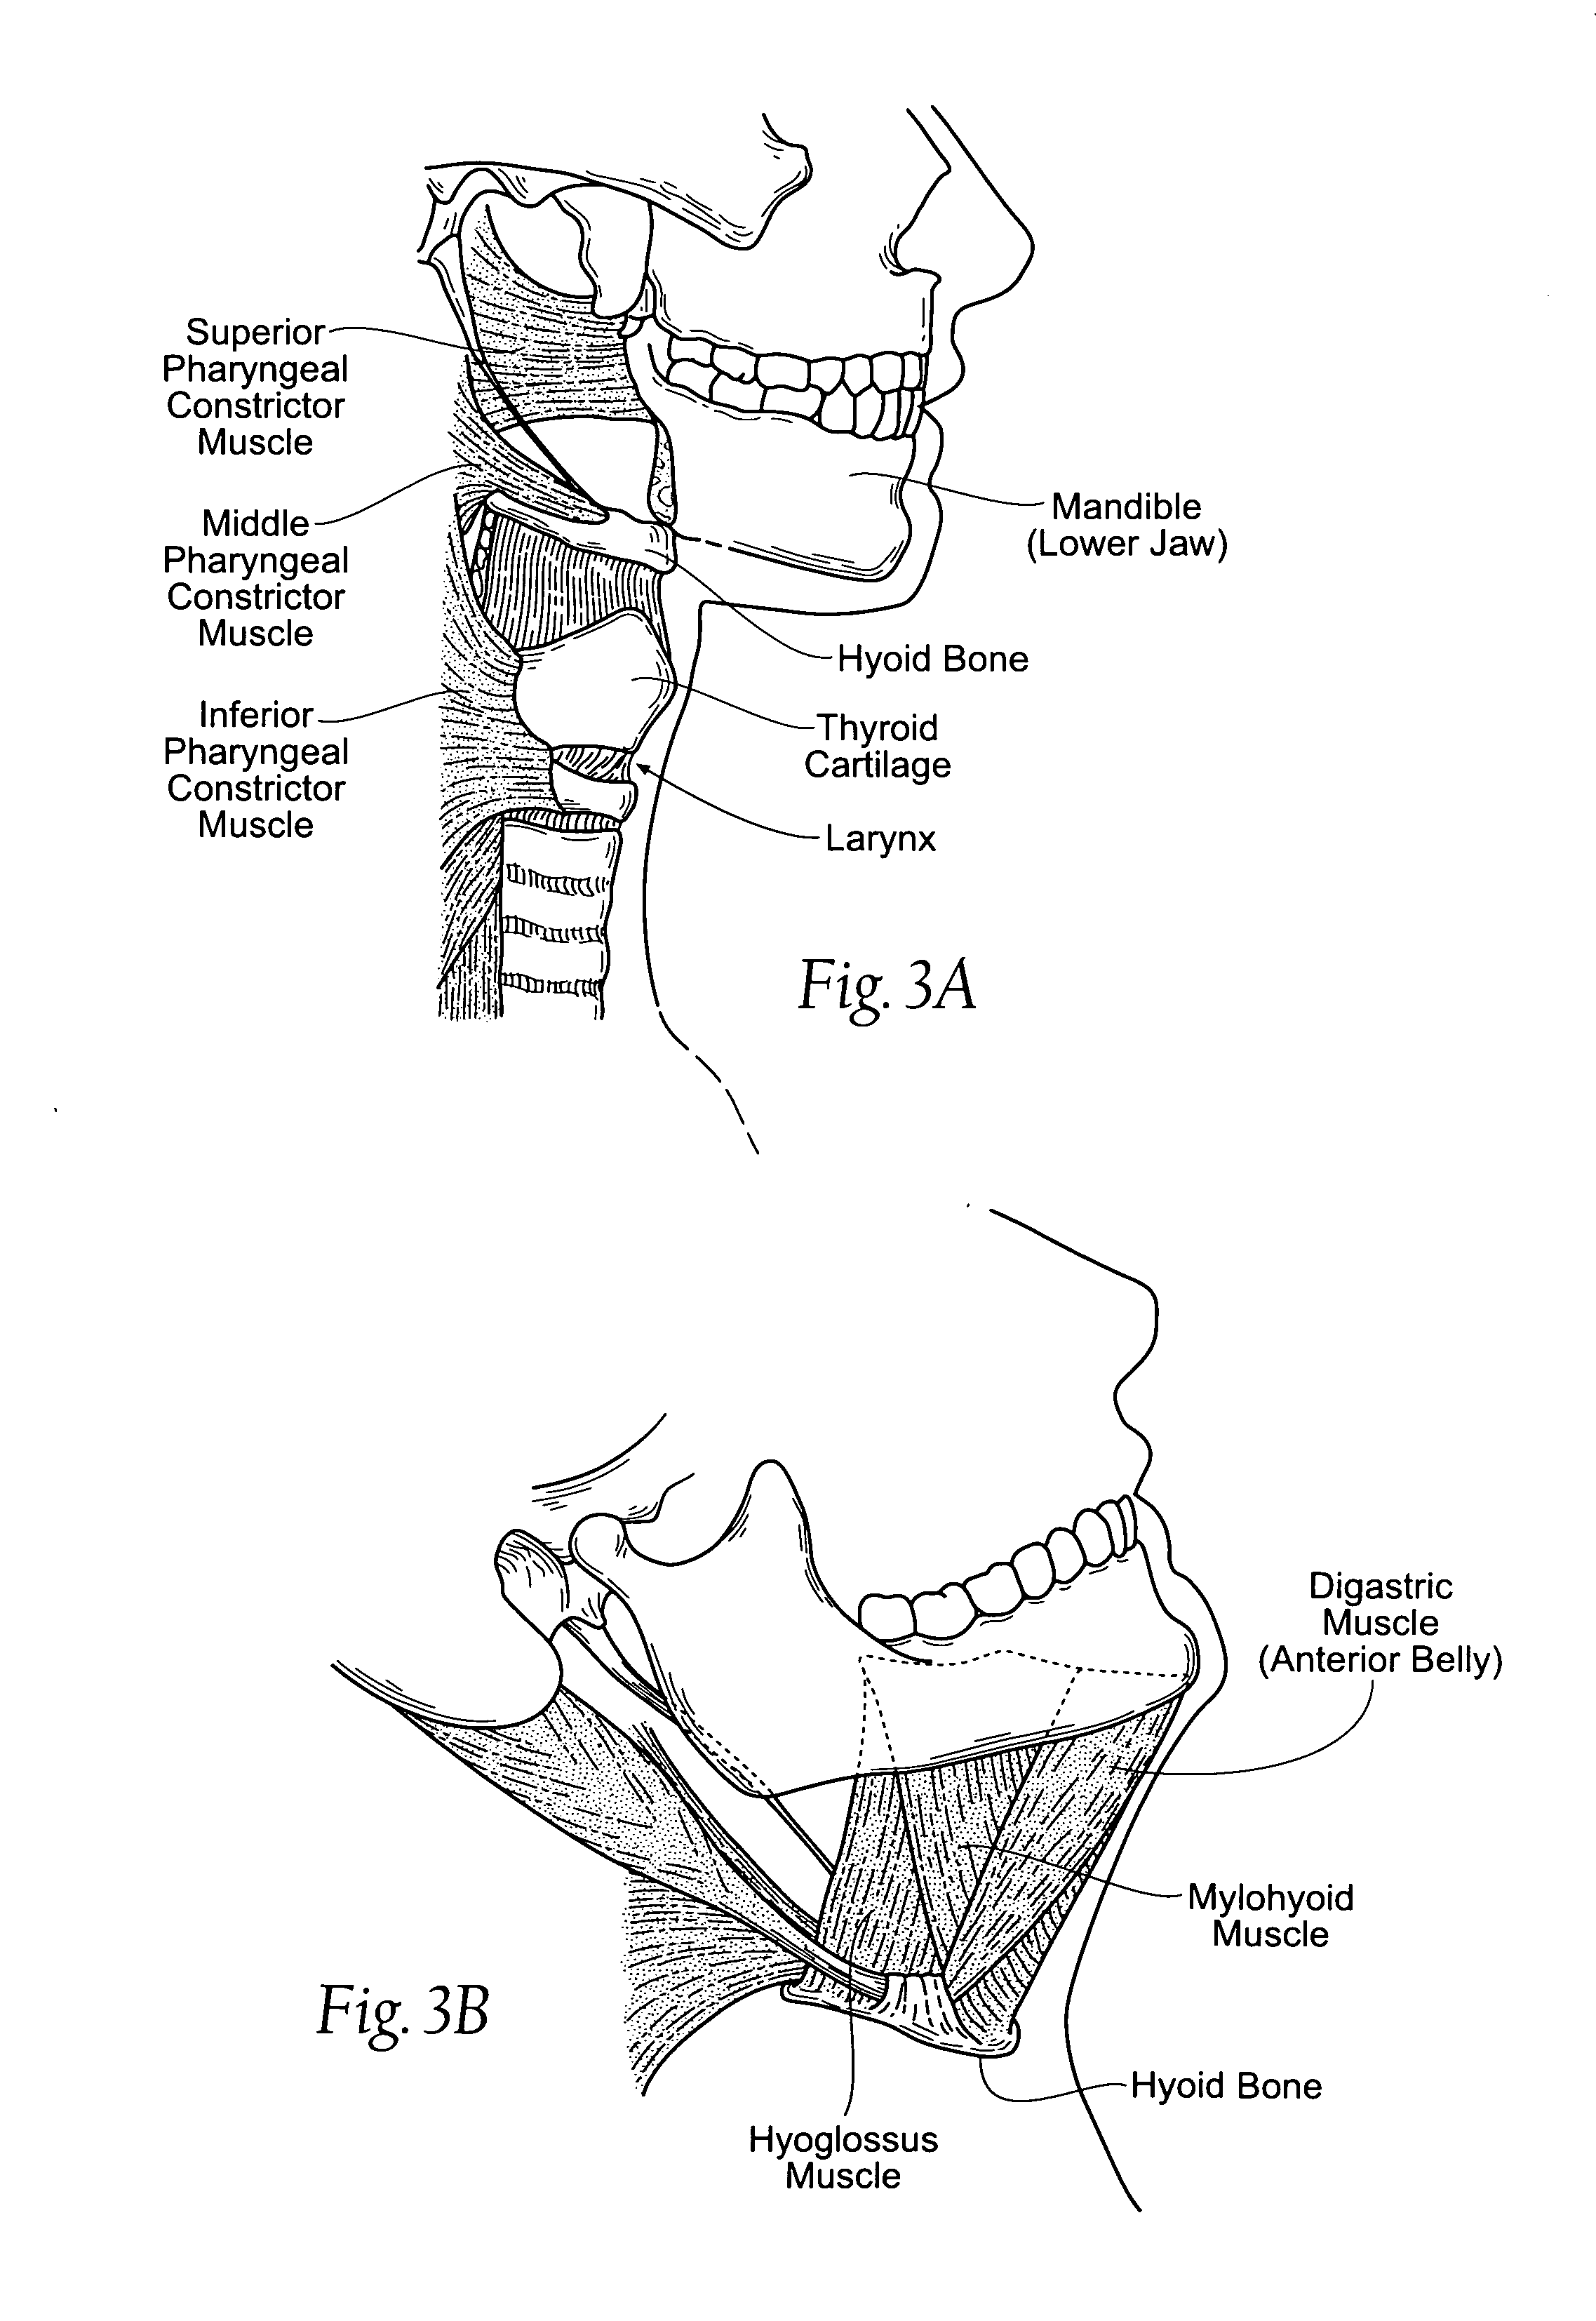 Devices, systems, and methods to move or restrain the hyoid bone